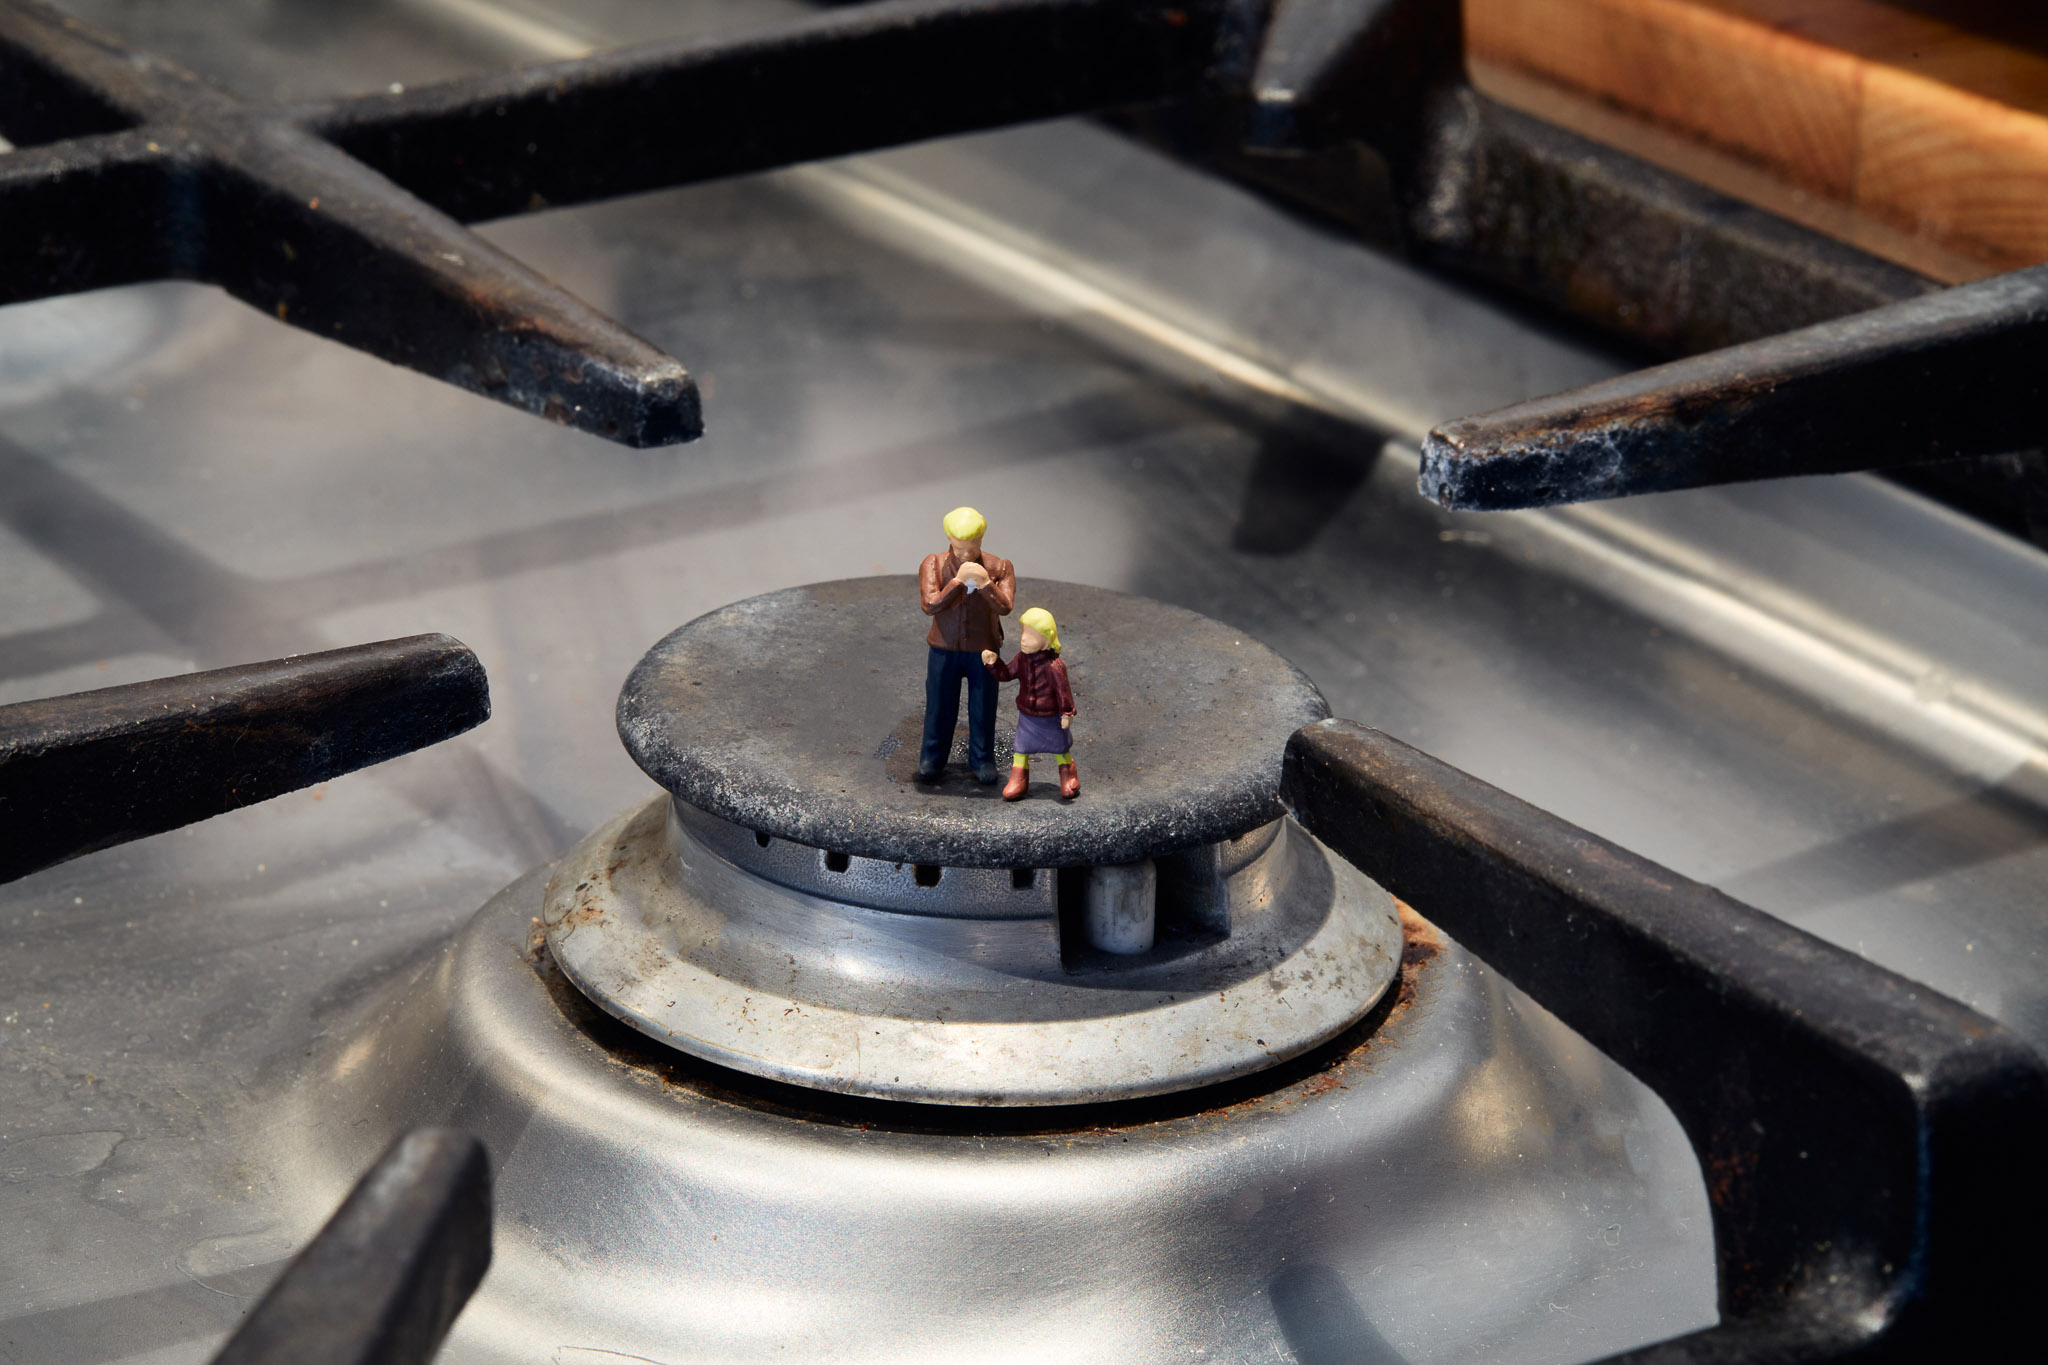 Small figurines on oven hob